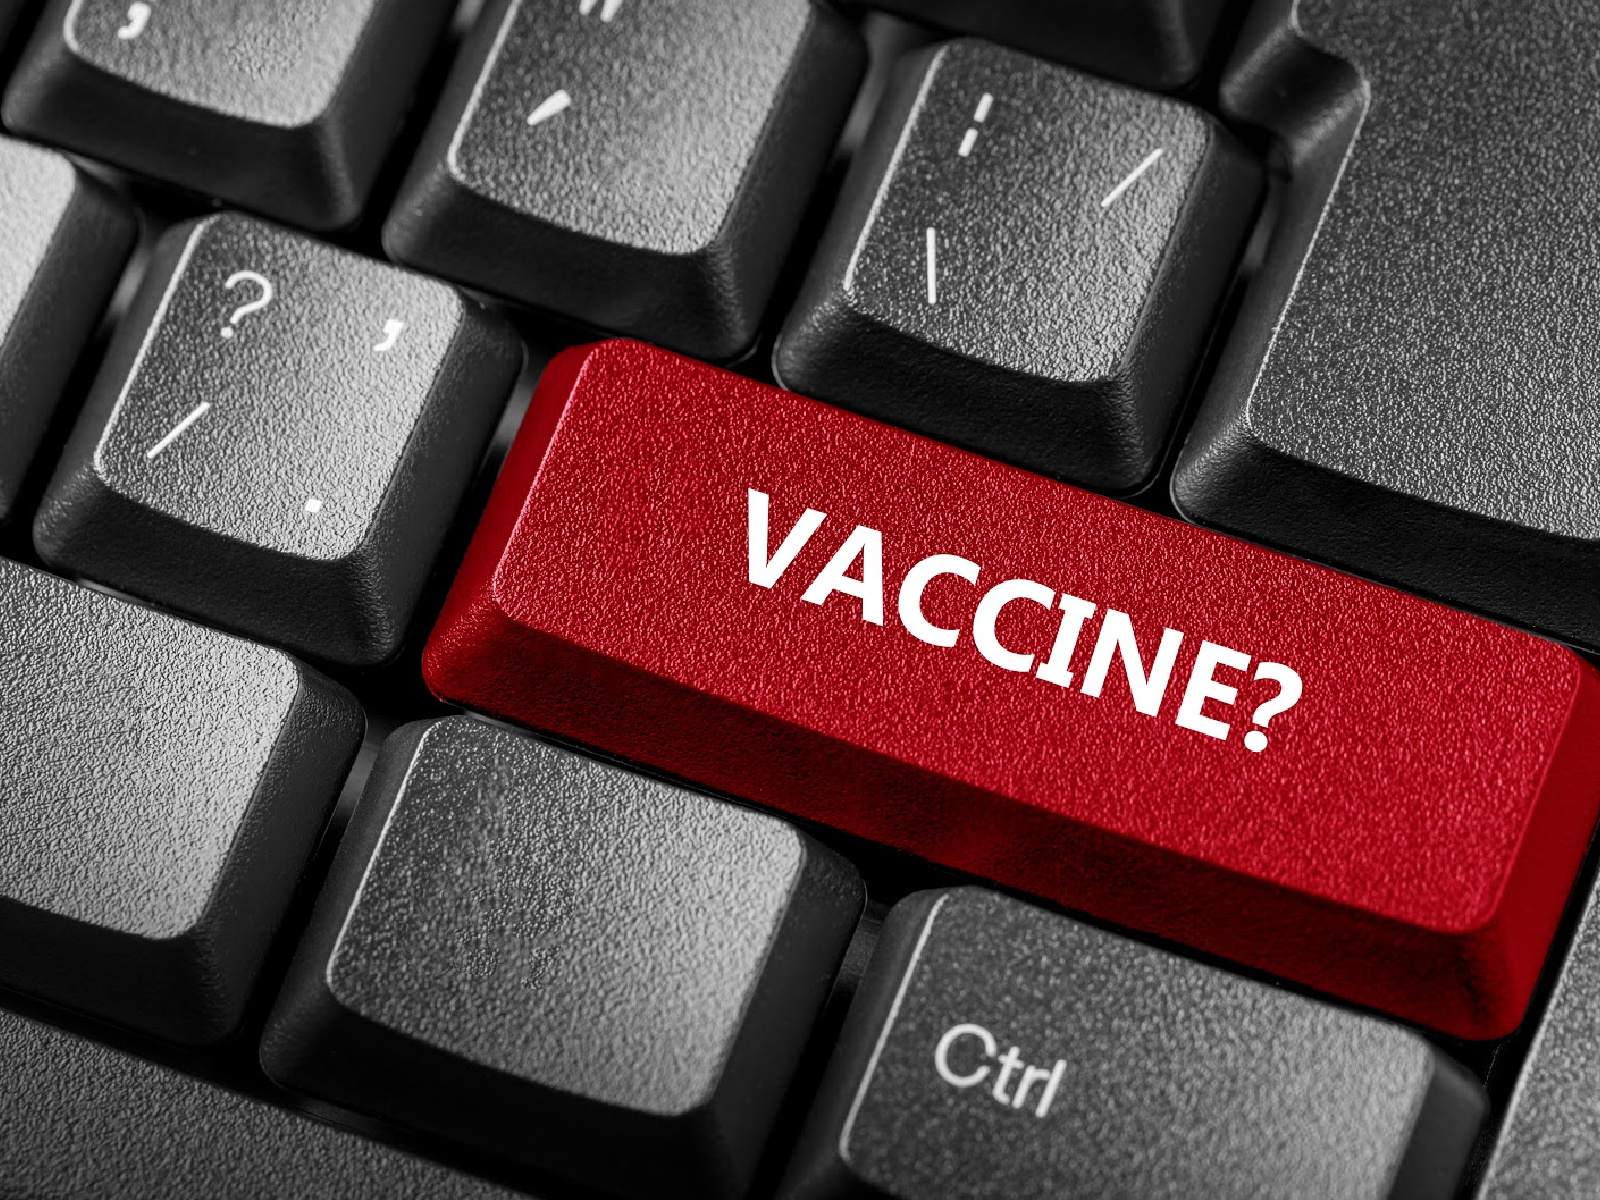 Can (and Should) My Business Mandate the COVID-19 Vaccine for Employees?